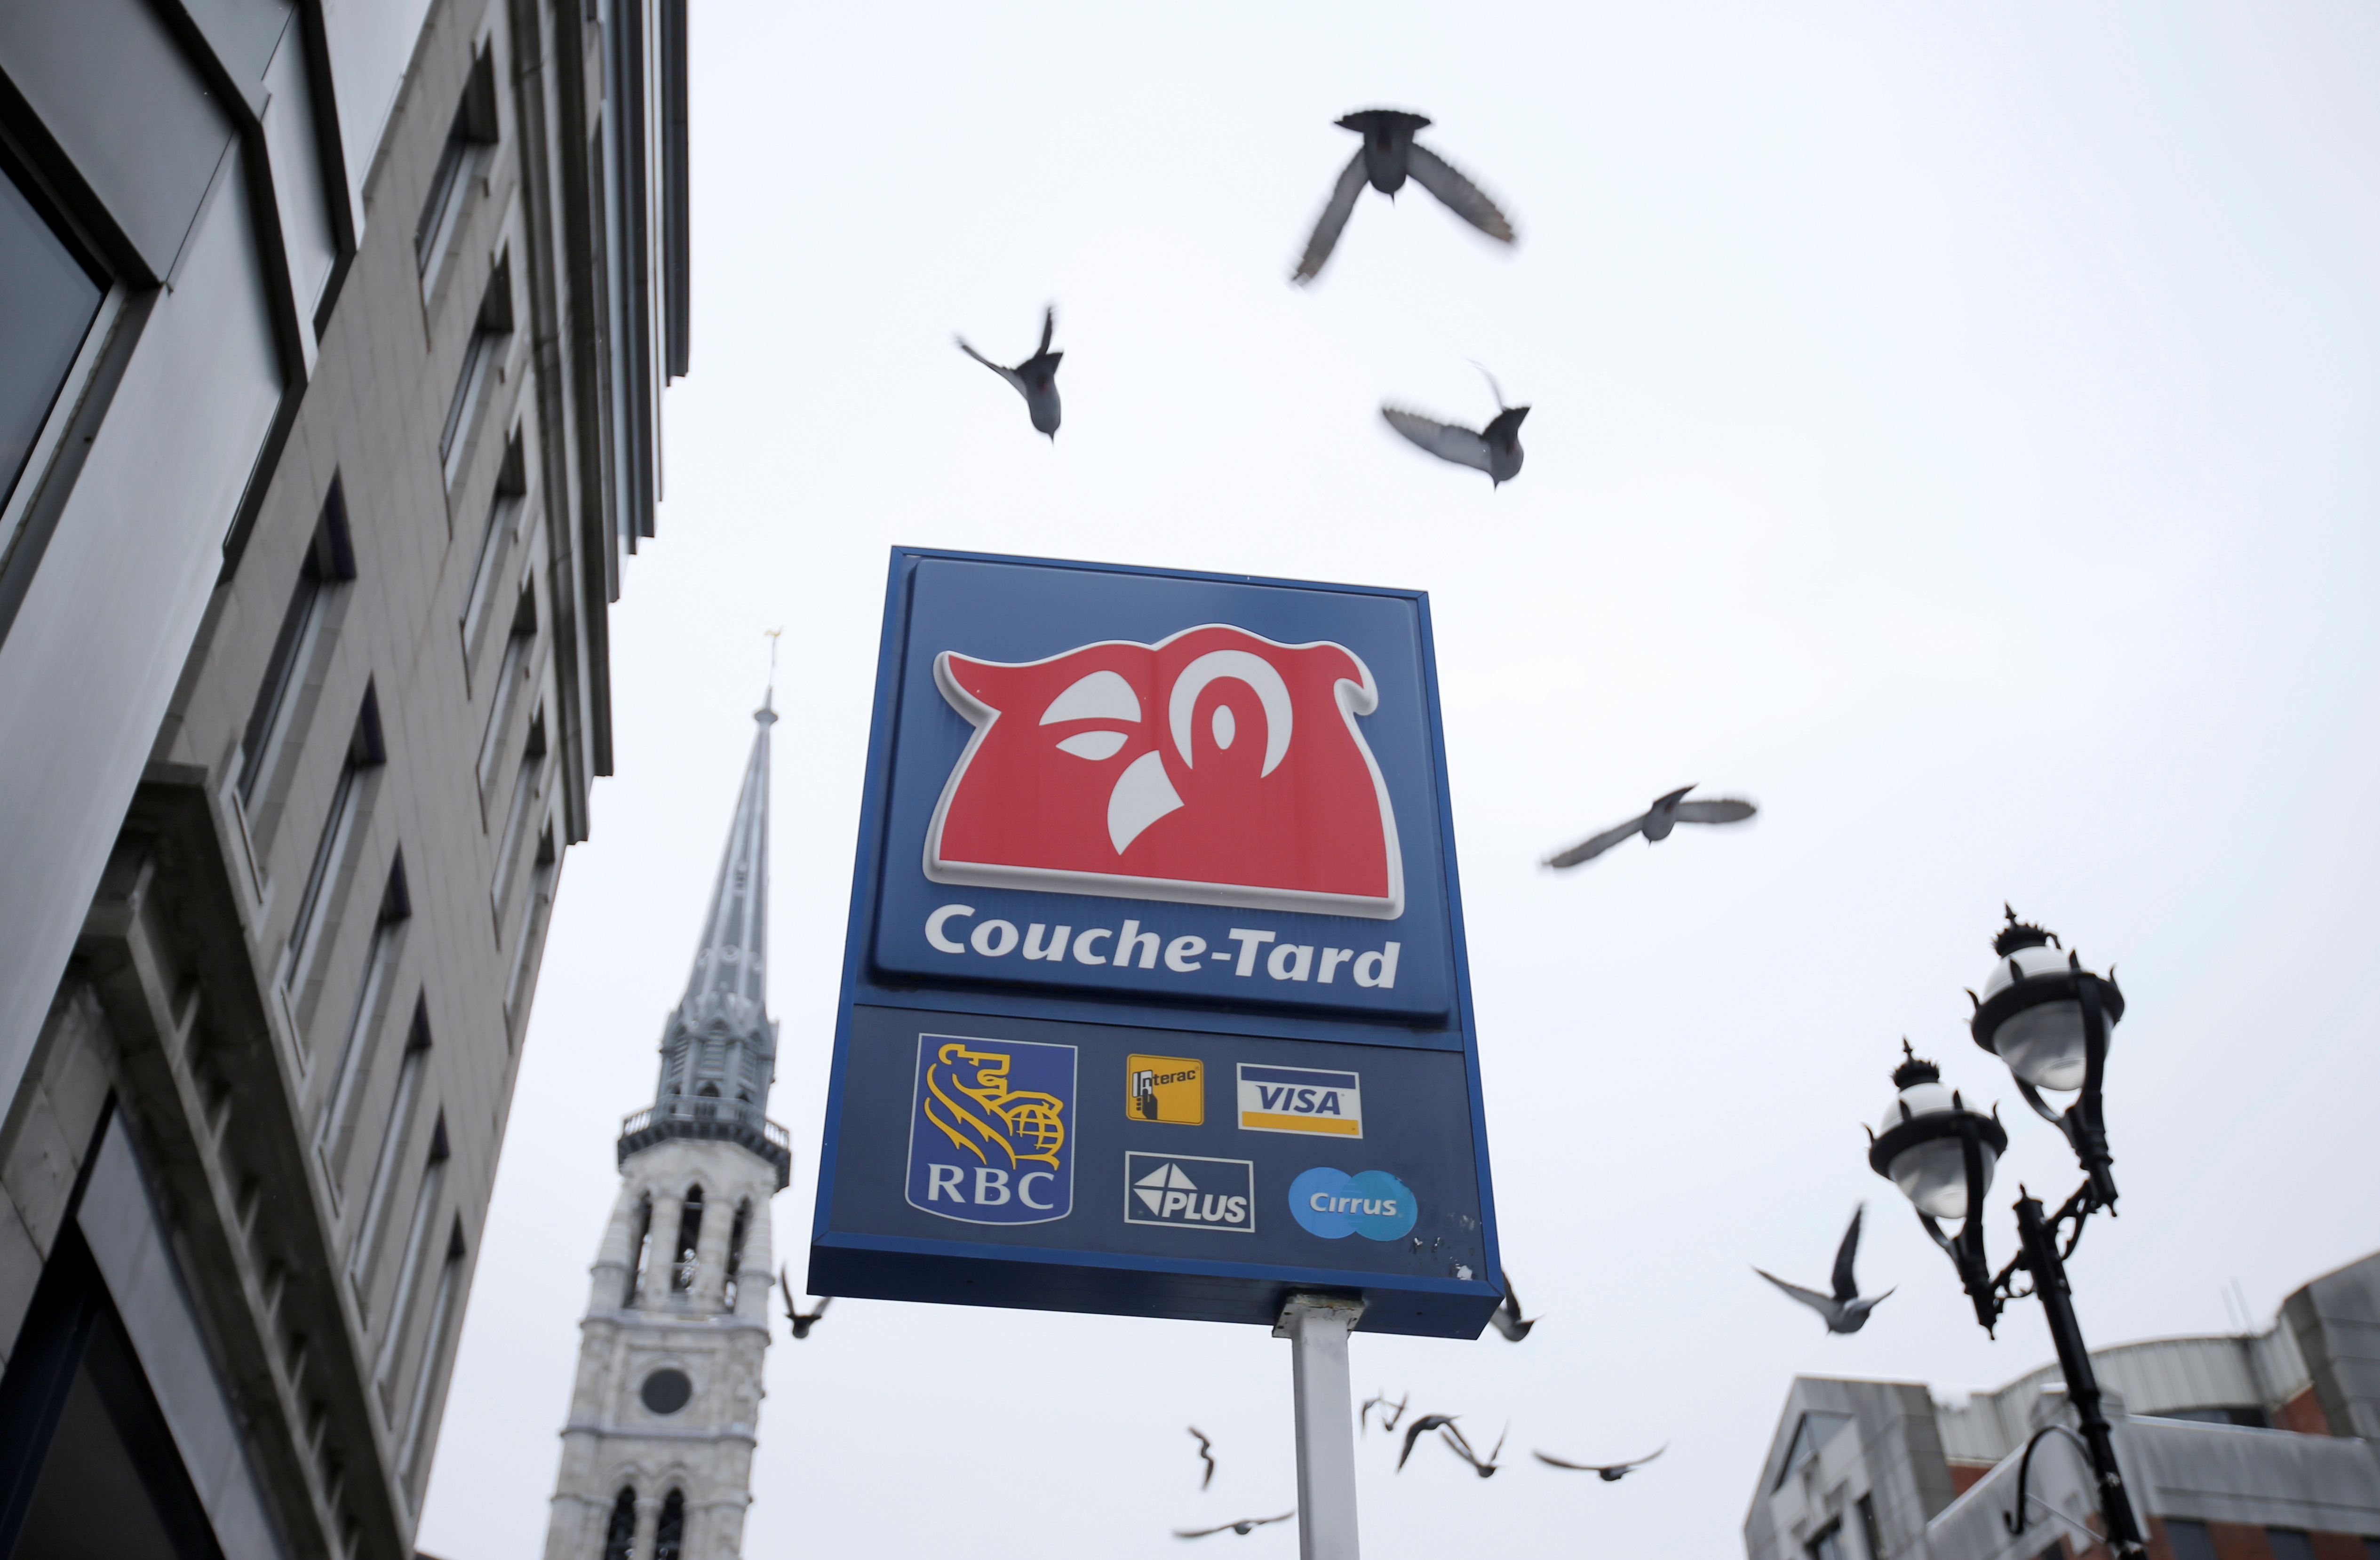 The logo of a Couche-Tard convenience store is seen in Montreal